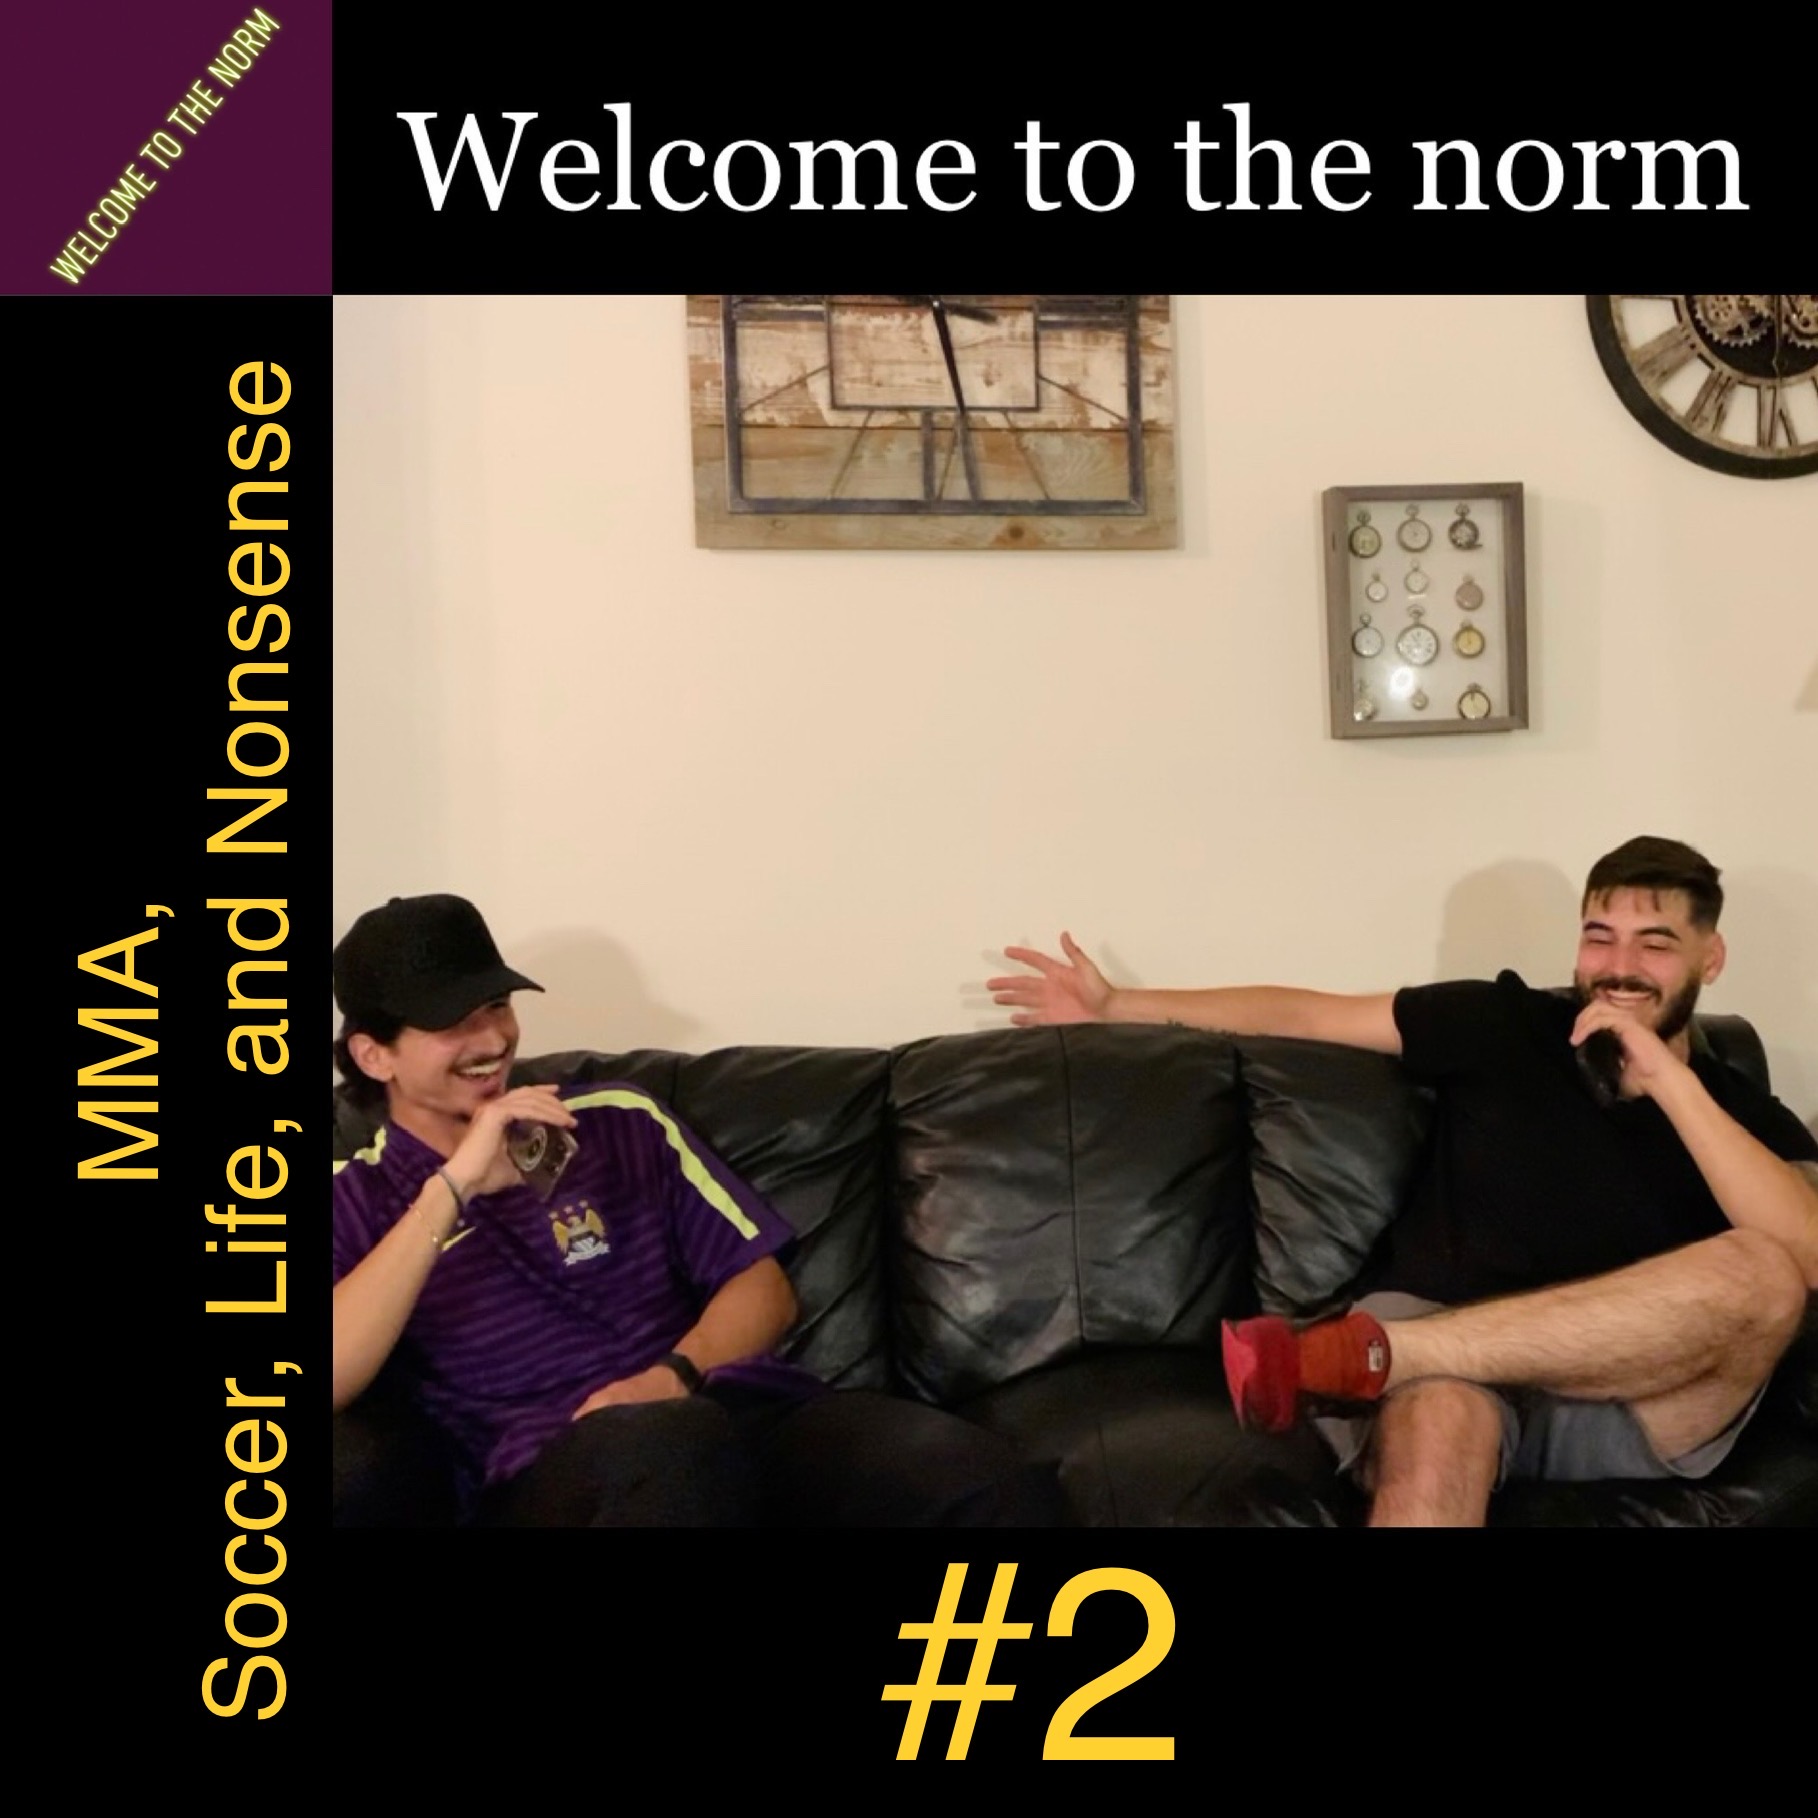 welcome to the norm podcast. soccer, mma, sports, merchandise, life, help. blog